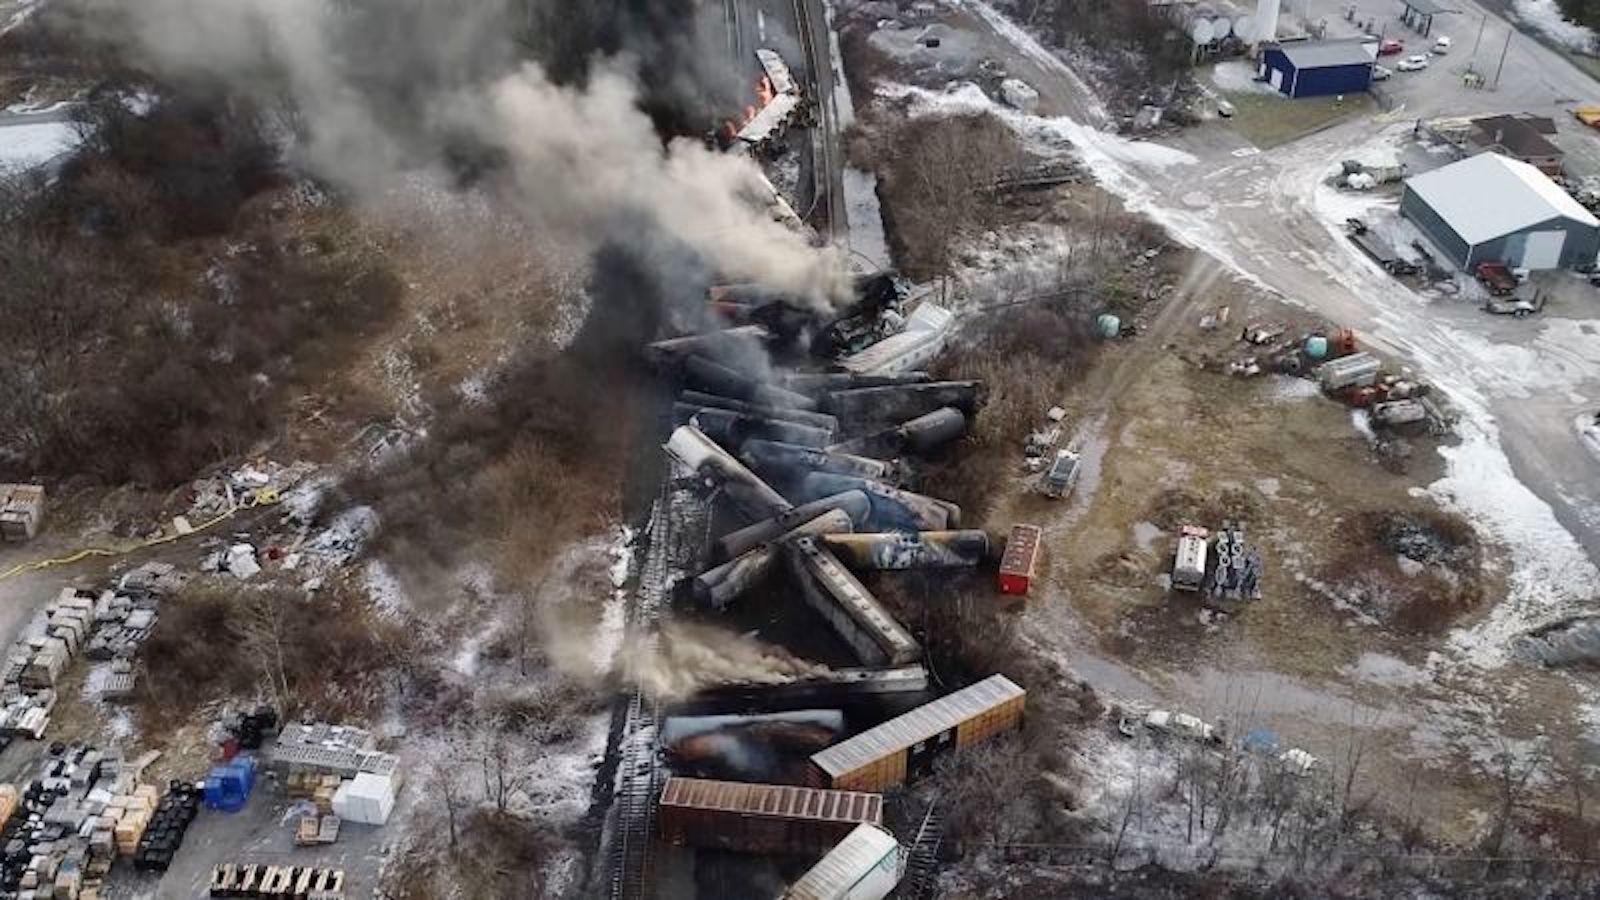 Ohio Danger of explosion after train derailment in the USA The